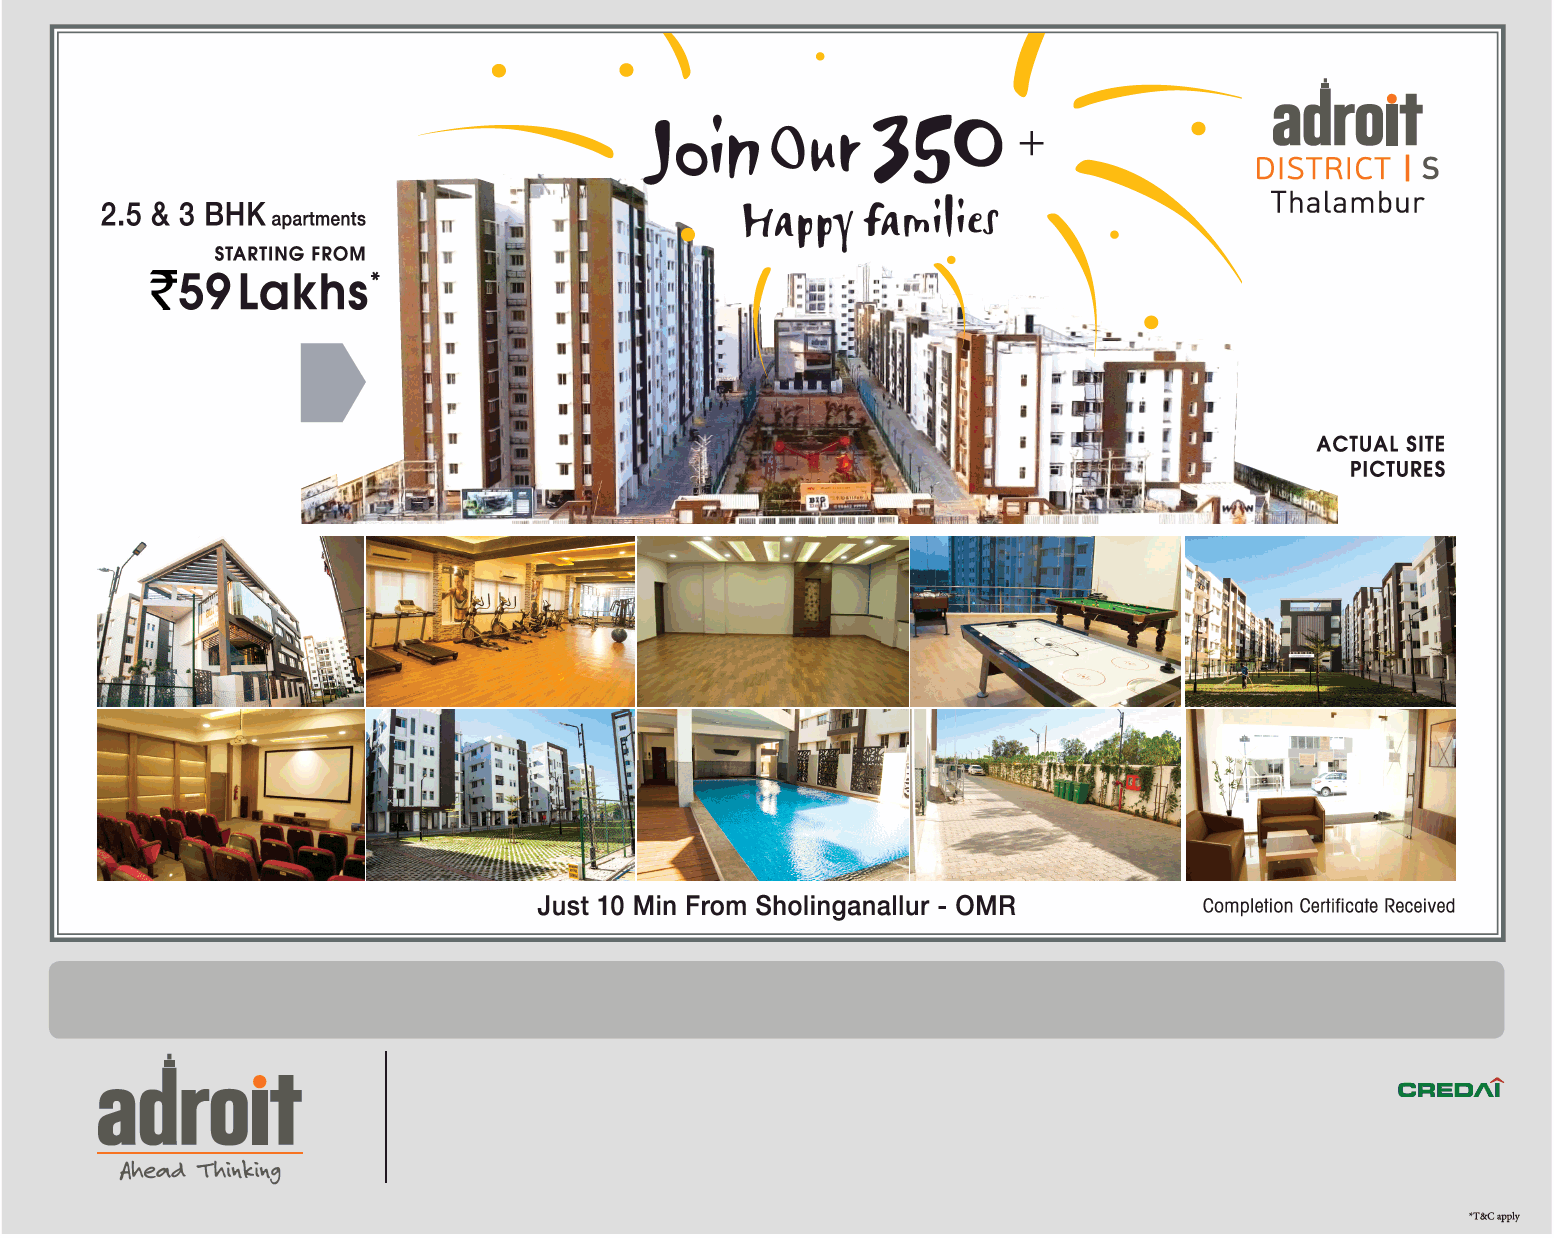 Adroit District S Offer 2.5 and 3 BHK apartments starting from Rs 59 Lakh in Chennai